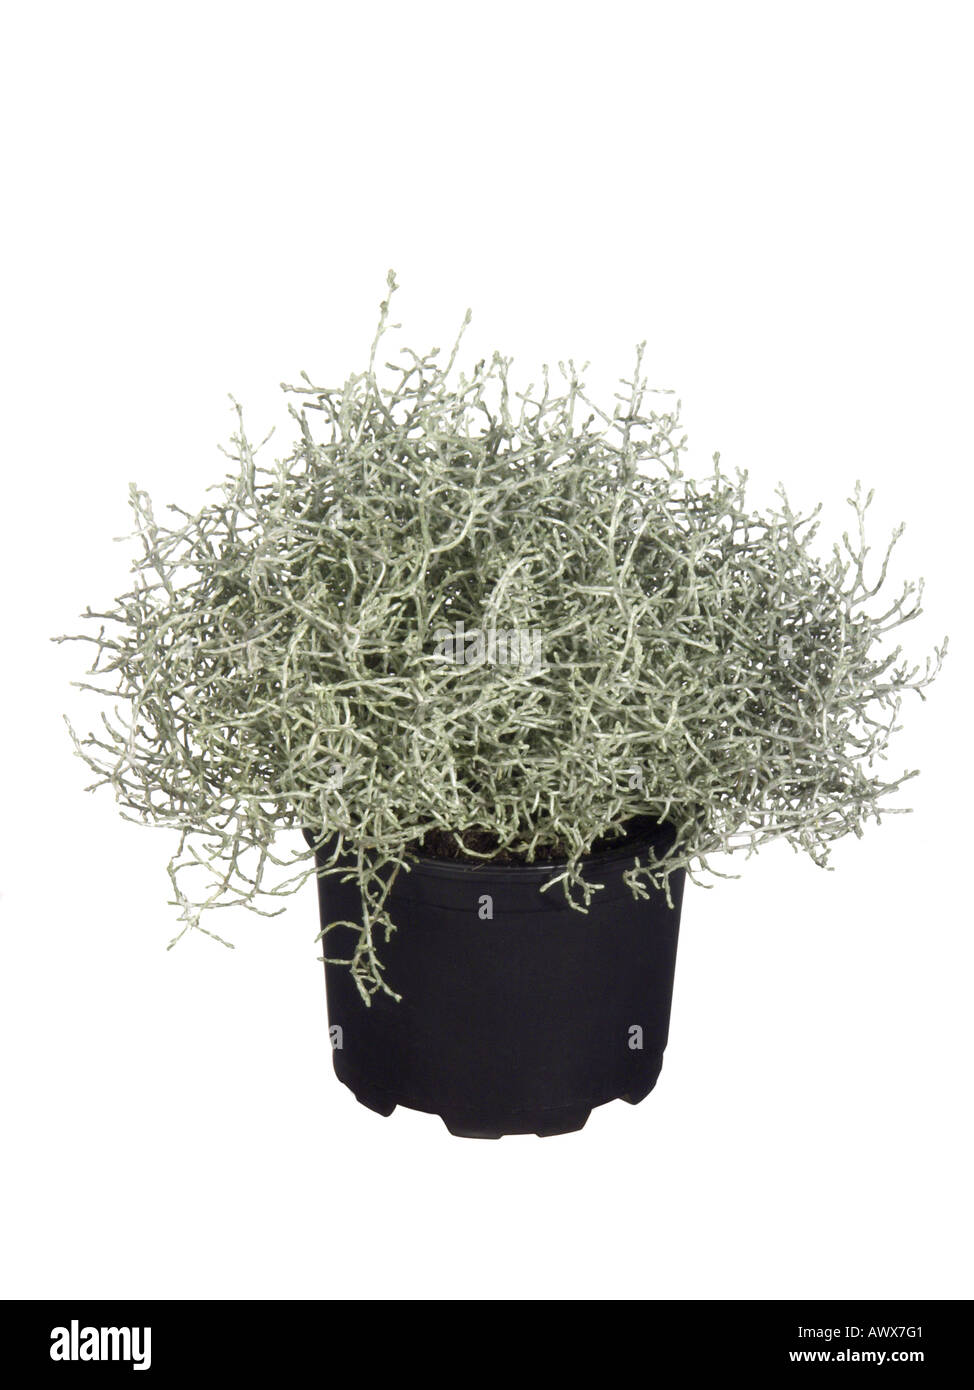 Silver Wire Netting Plant, Cushion Bush (Calocephalus brownii), potted plant Stock Photo